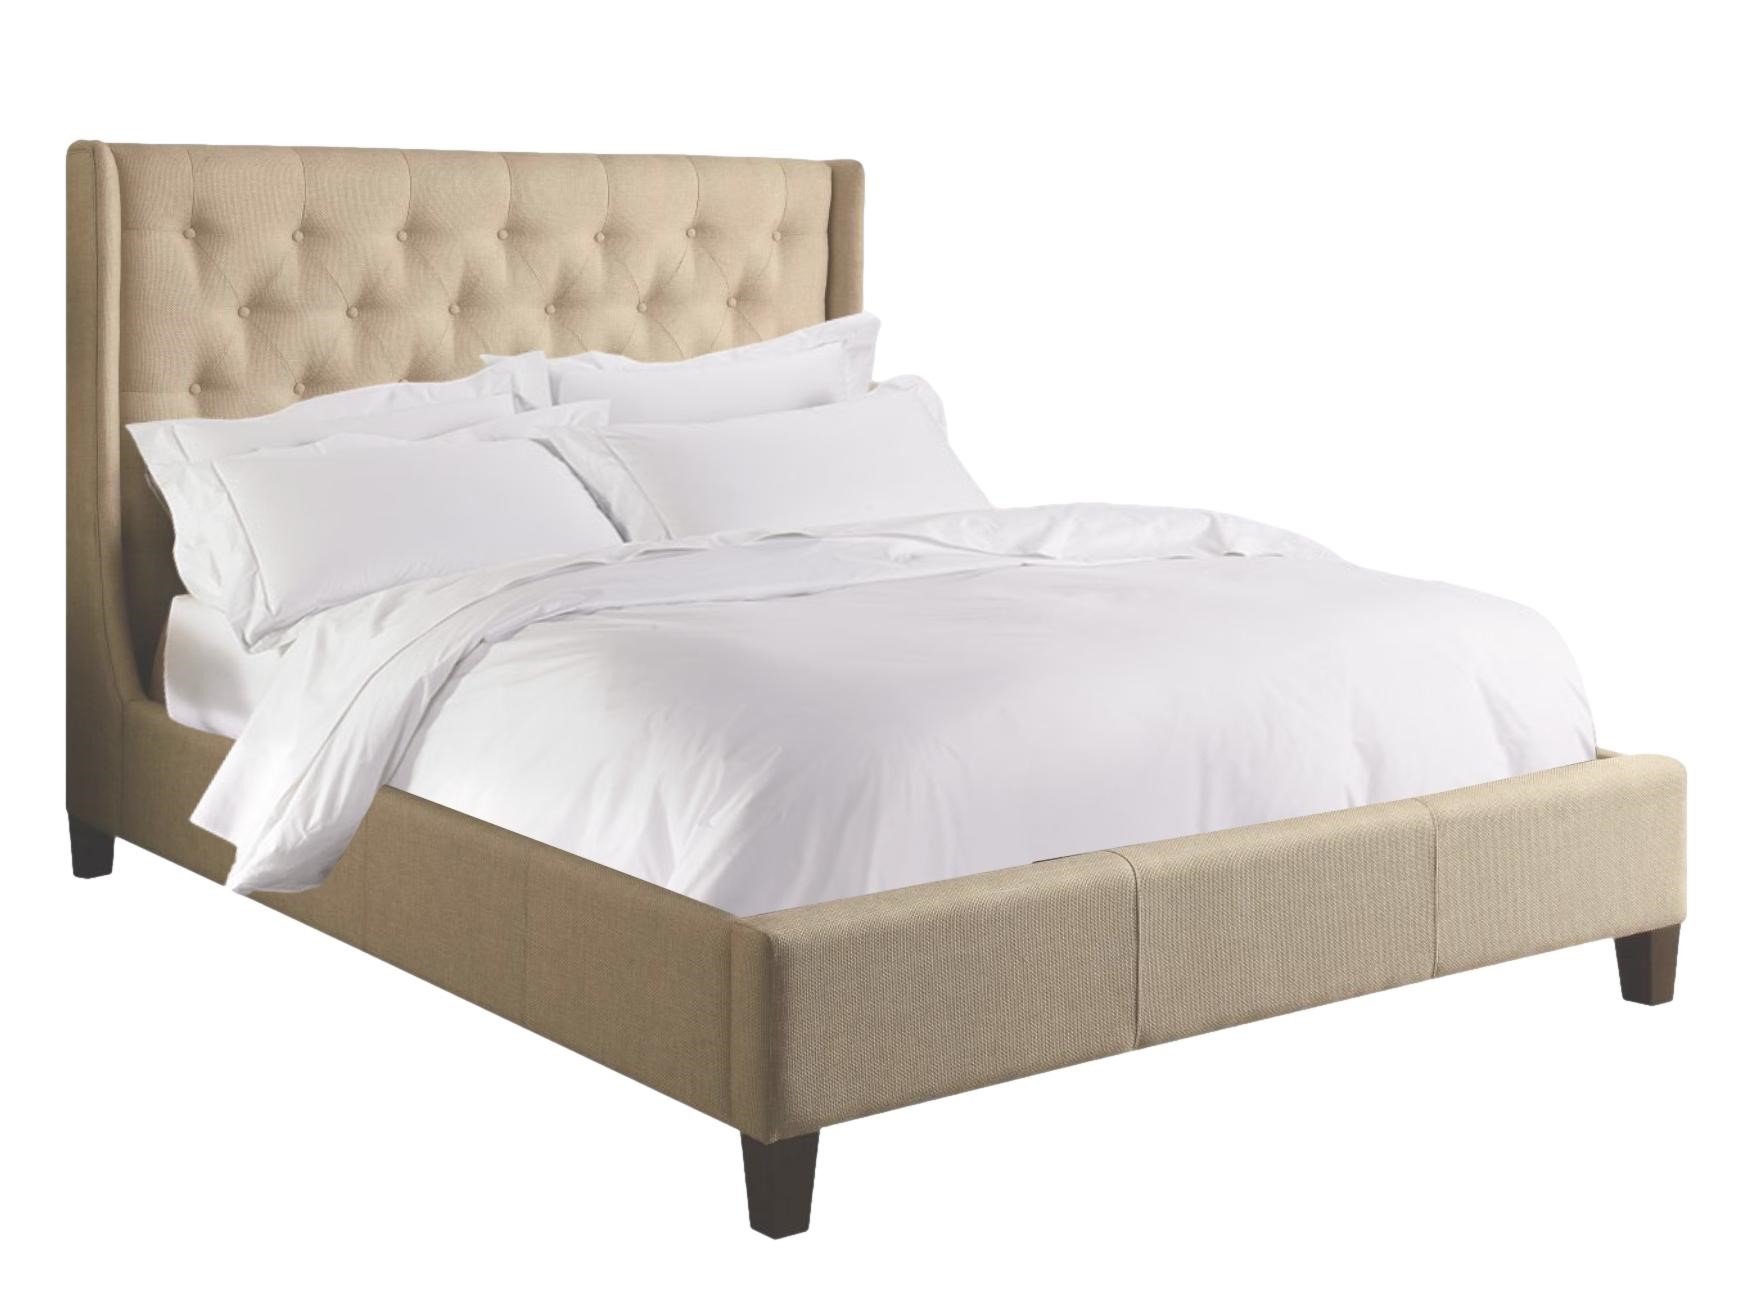 Heather King Bed